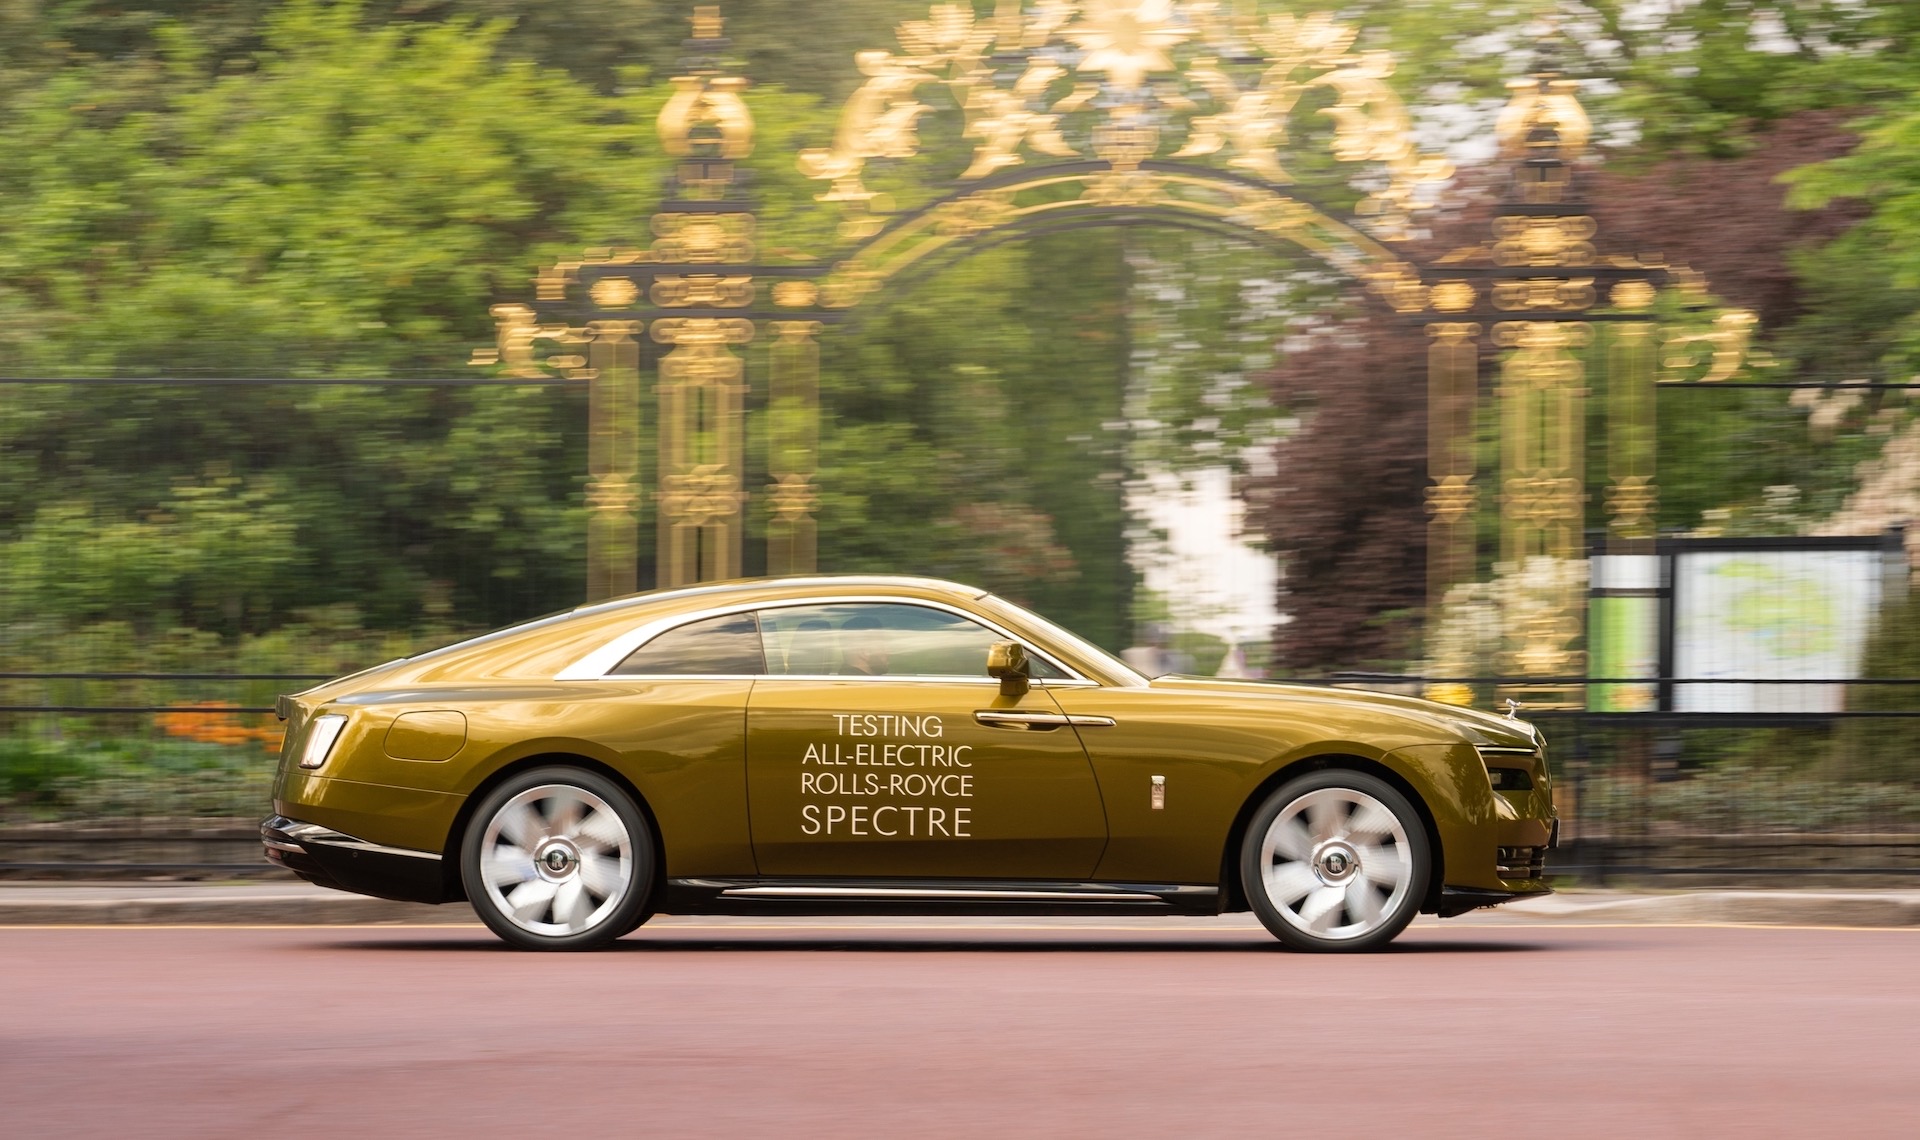 Electric Rolls-Royce Spectre wraps up testing ahead Q4 launch